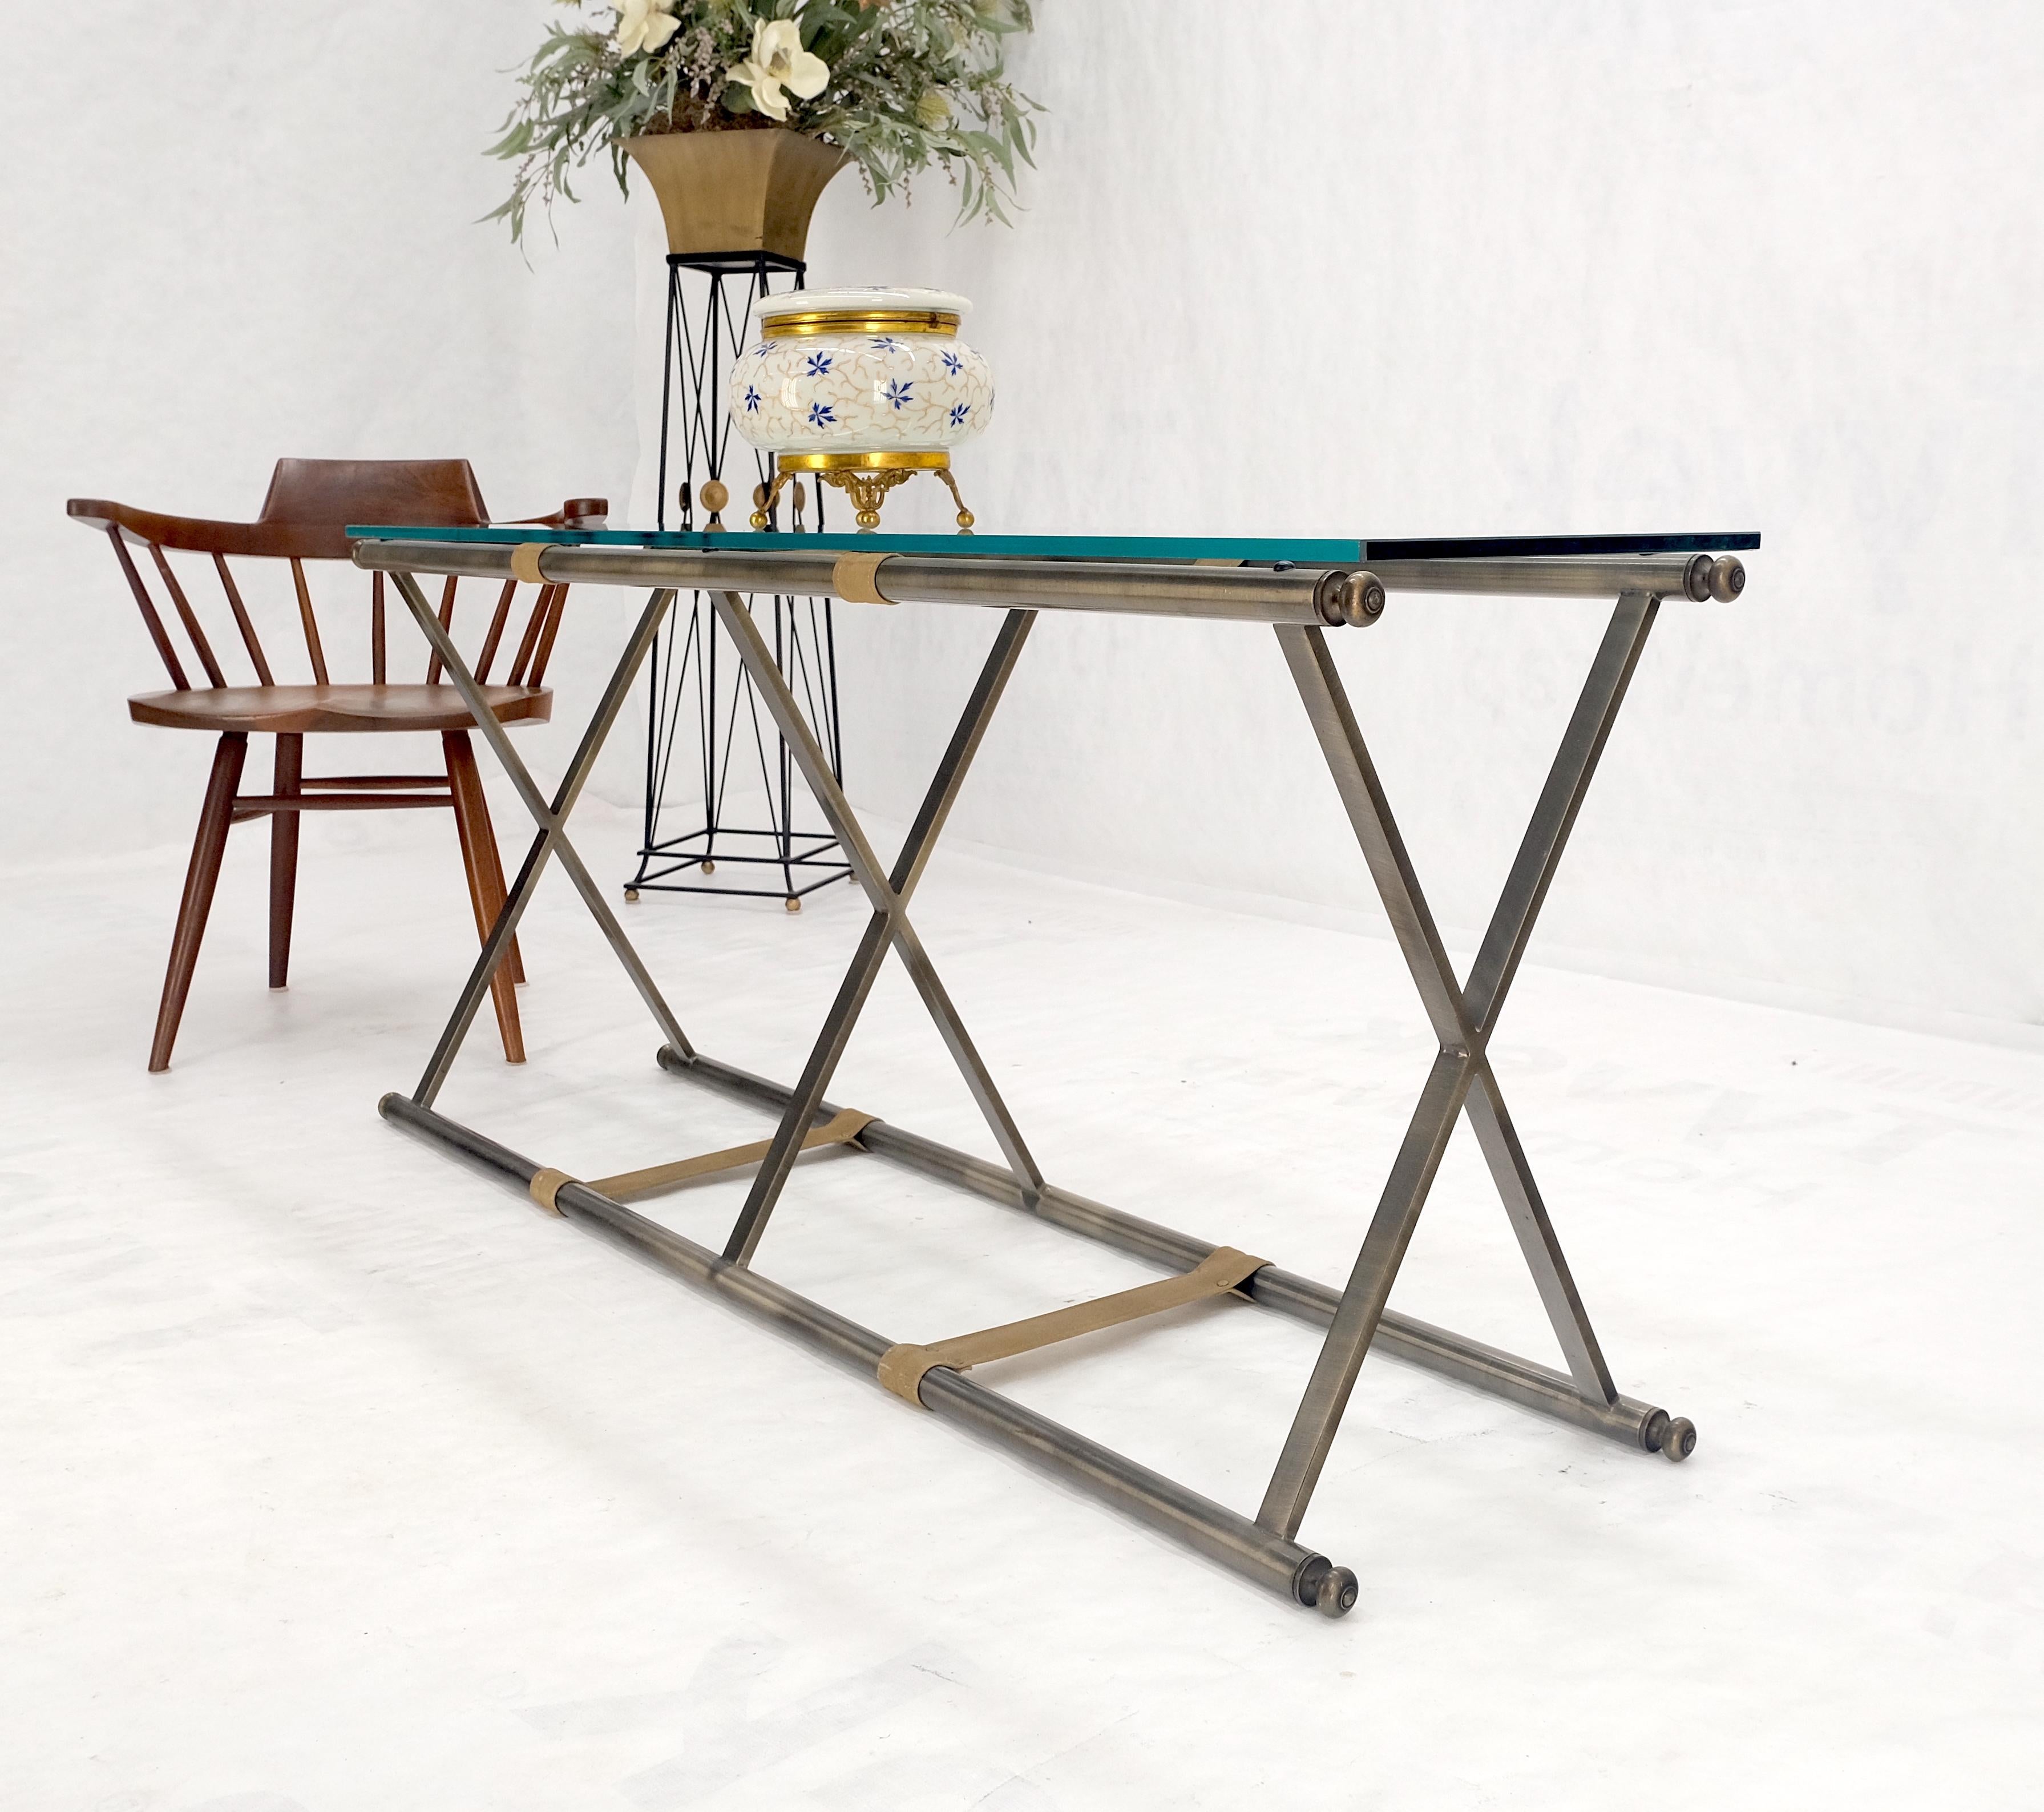 Glass Top X Shape Smoked Chrome Base rectangle Console Sofa Table MINT!
glass thickness: 0.5